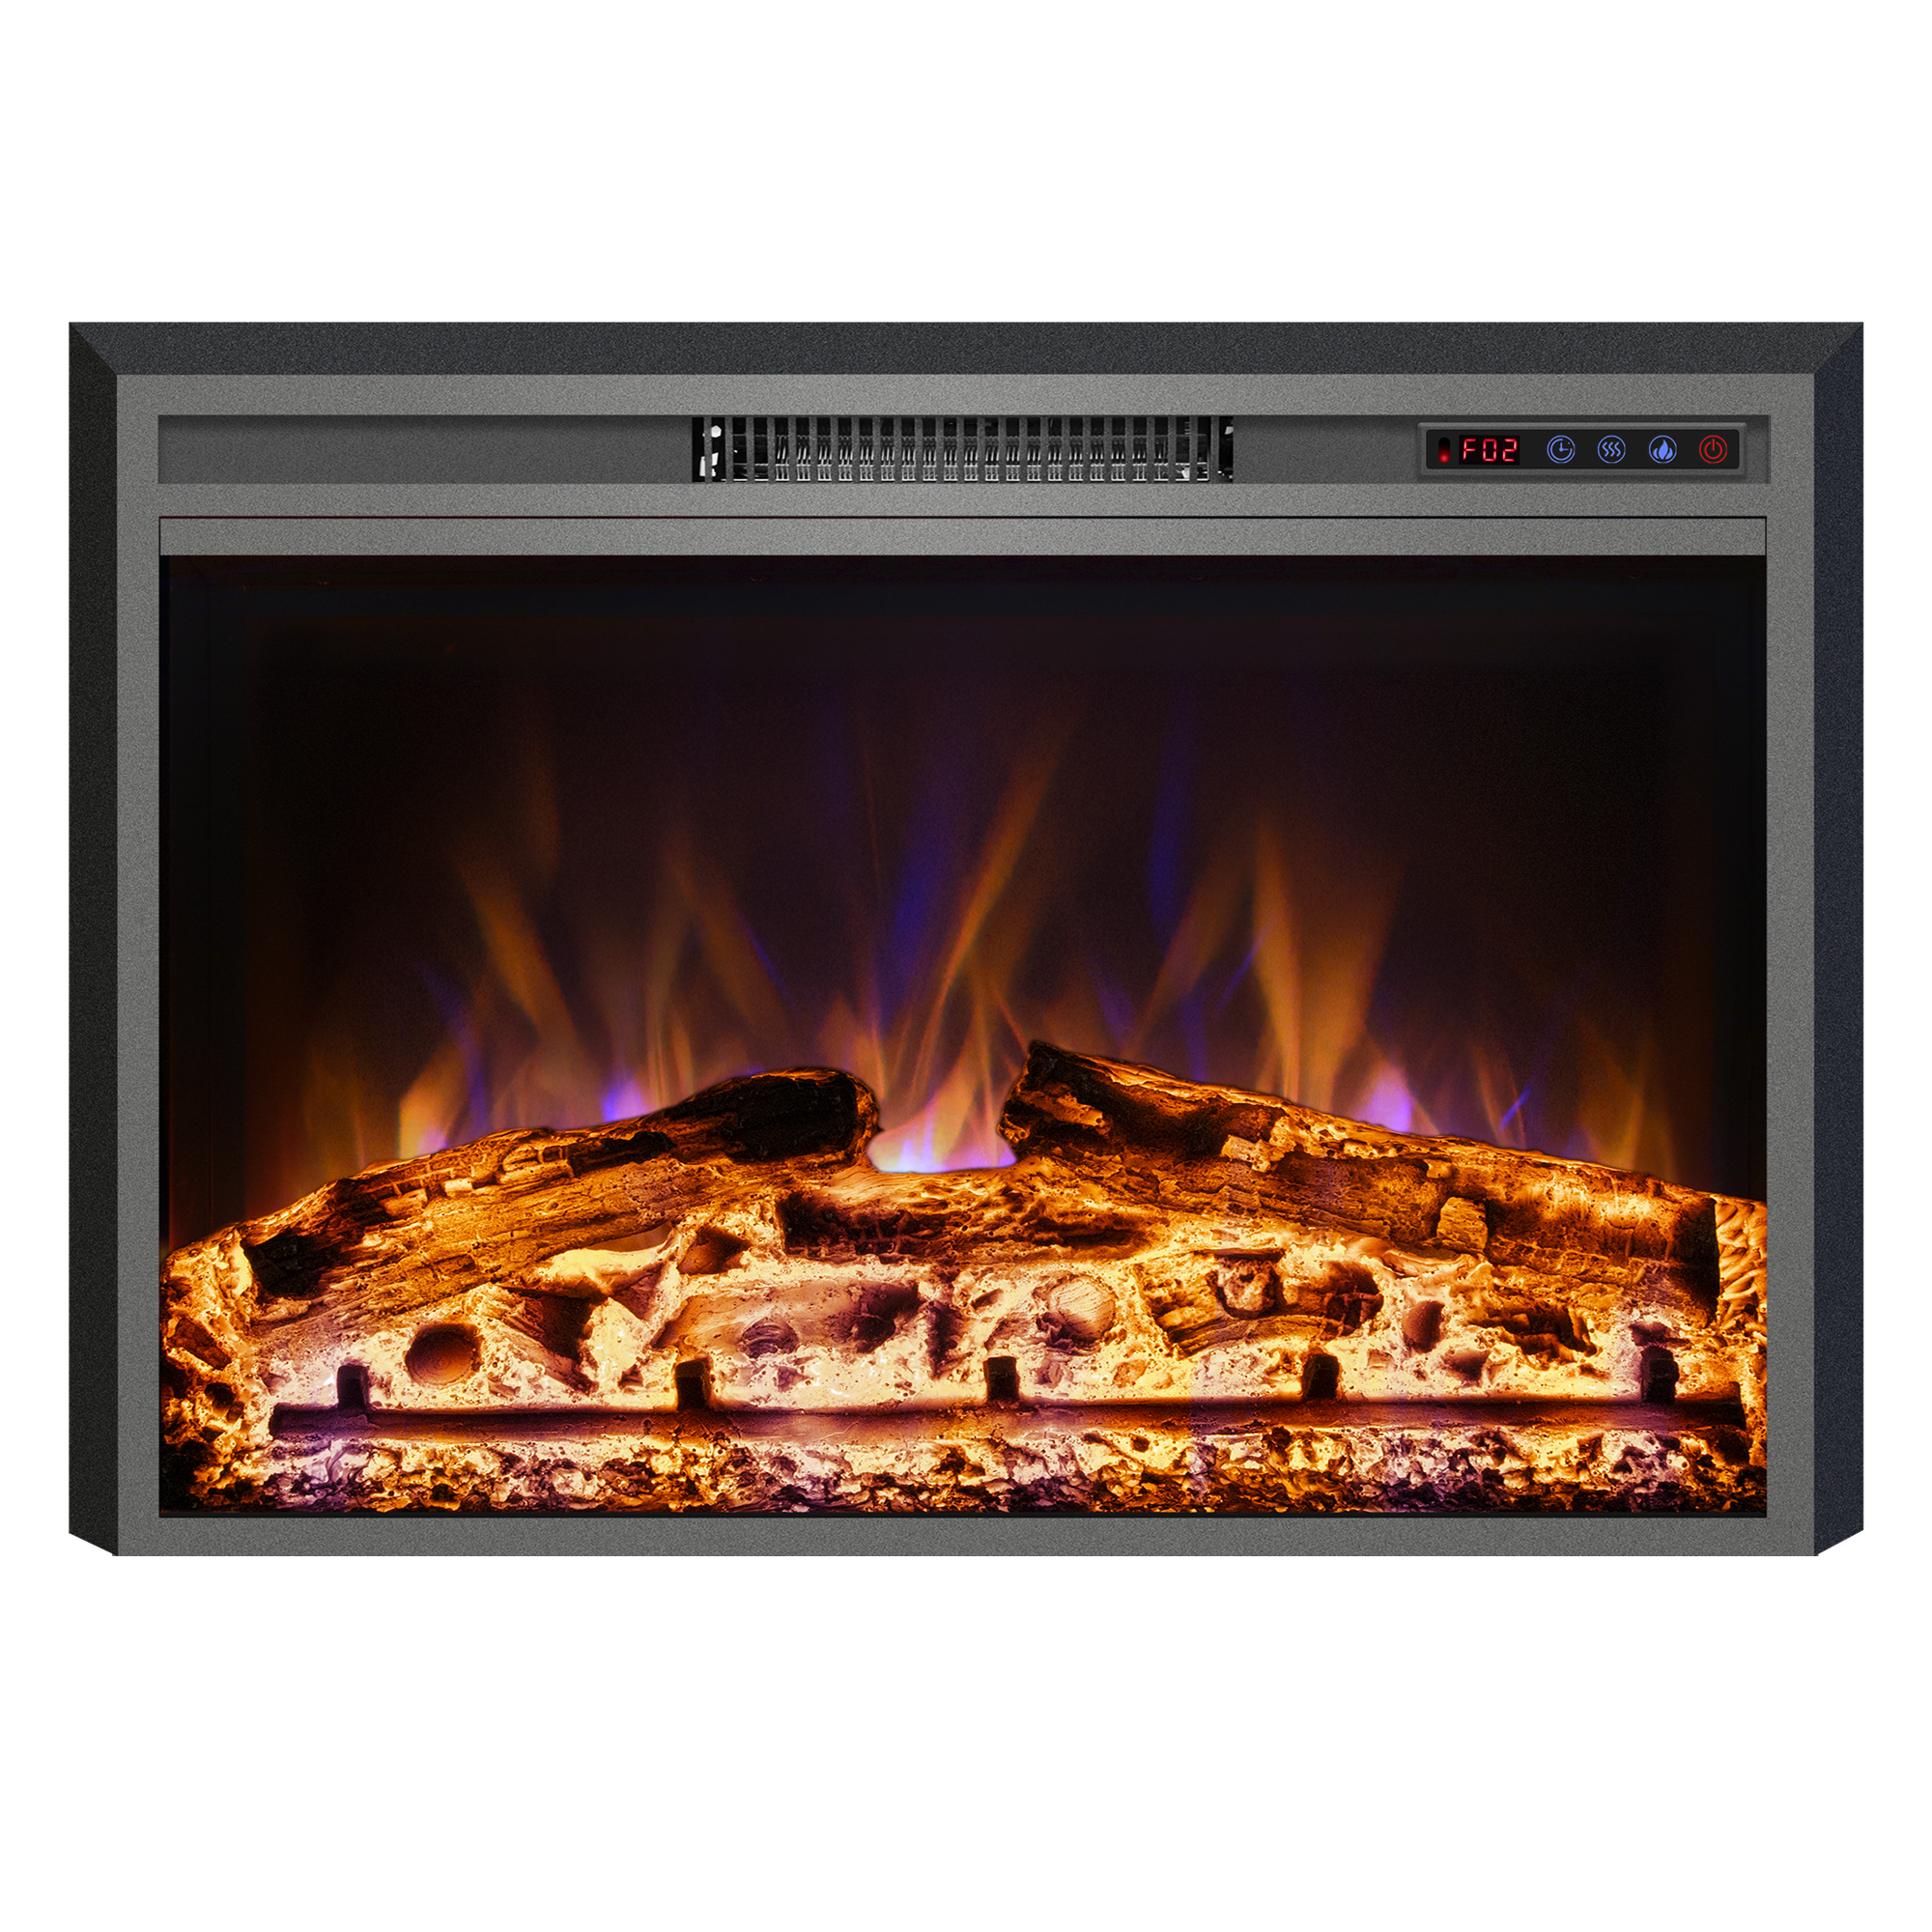 Electric Fireplace with Remote Control, Adjustable Flame Colors, Timer&Overheating Protection, 750/1500W